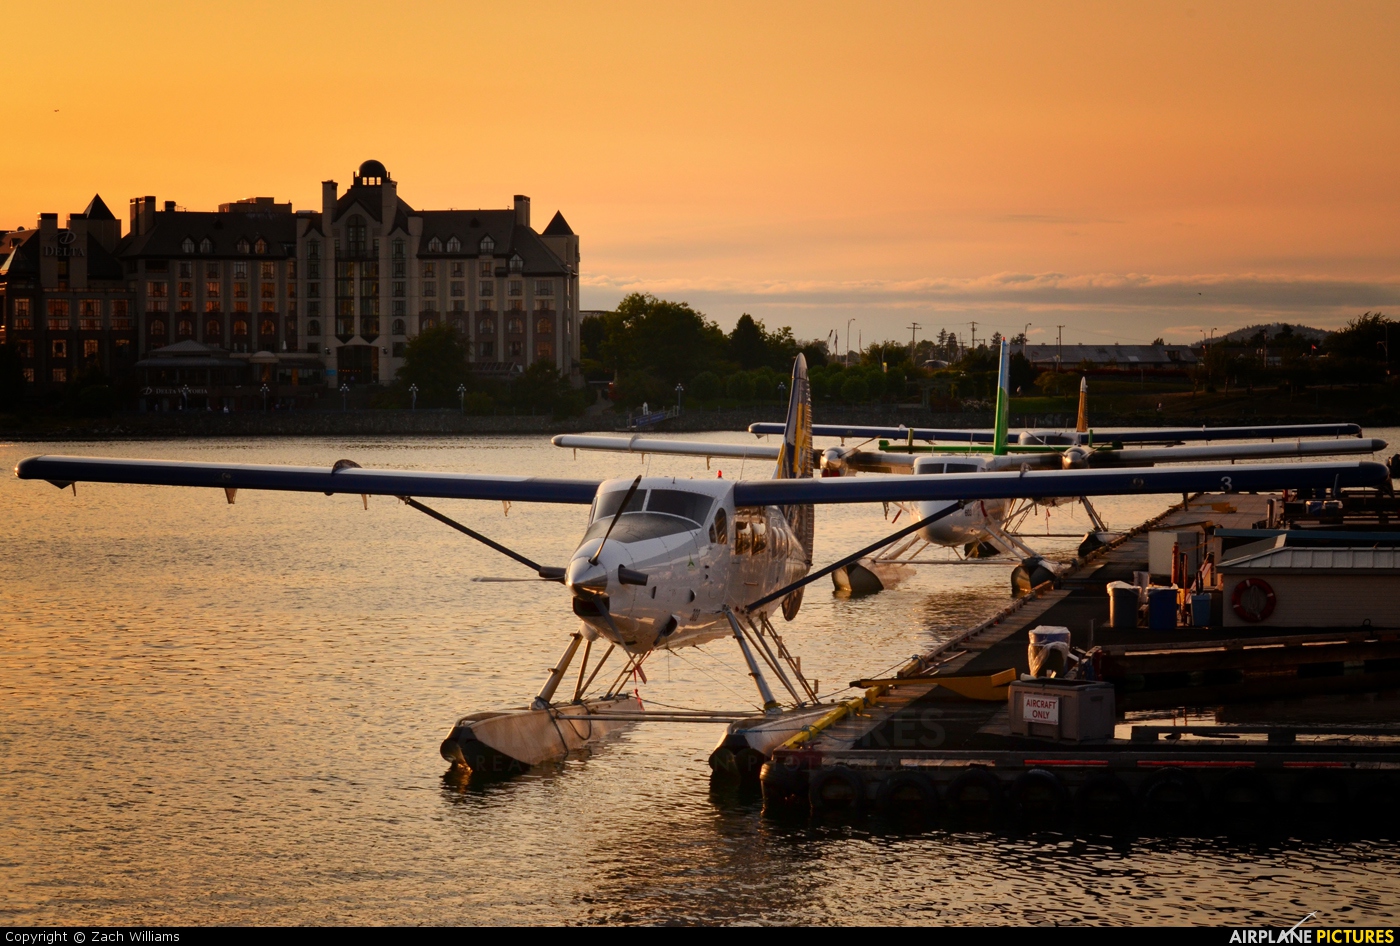 Harbour Air C-FHAX aircraft at Victoria Harbour, BC